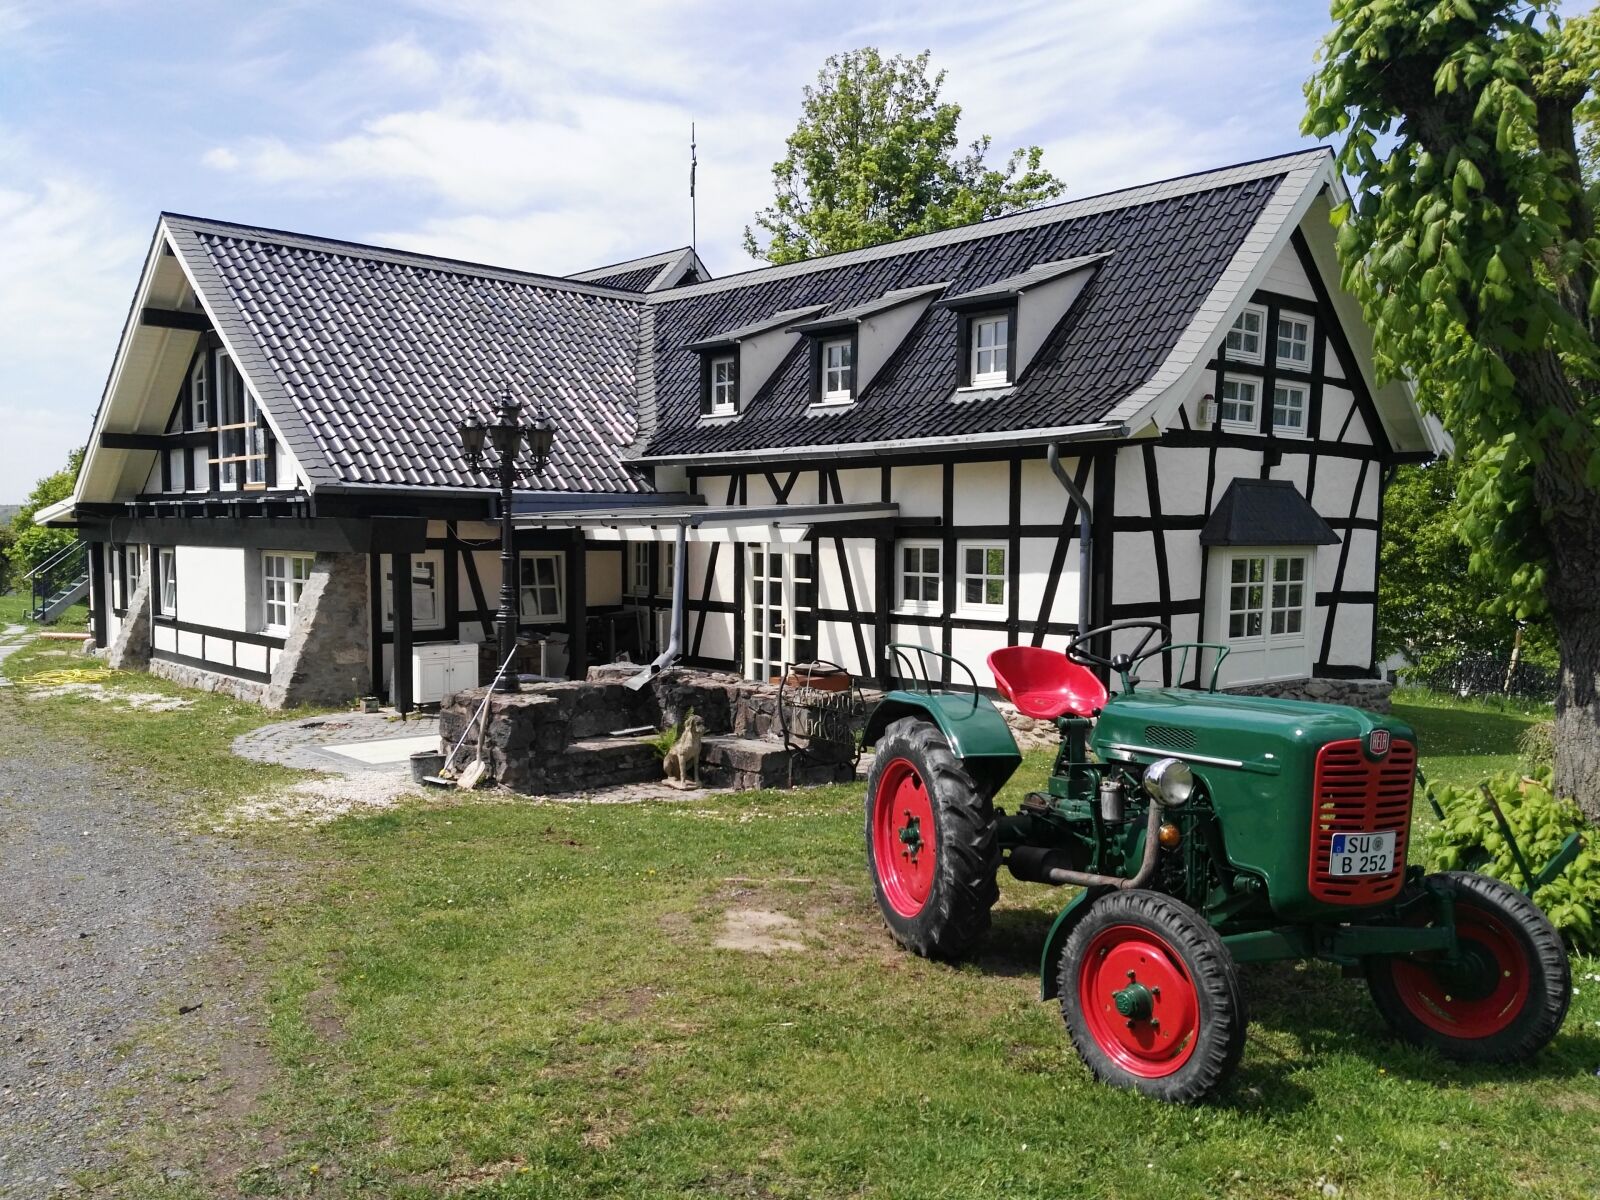 HUAWEI GX8 sample photo. Tractor, campaign, germany photography